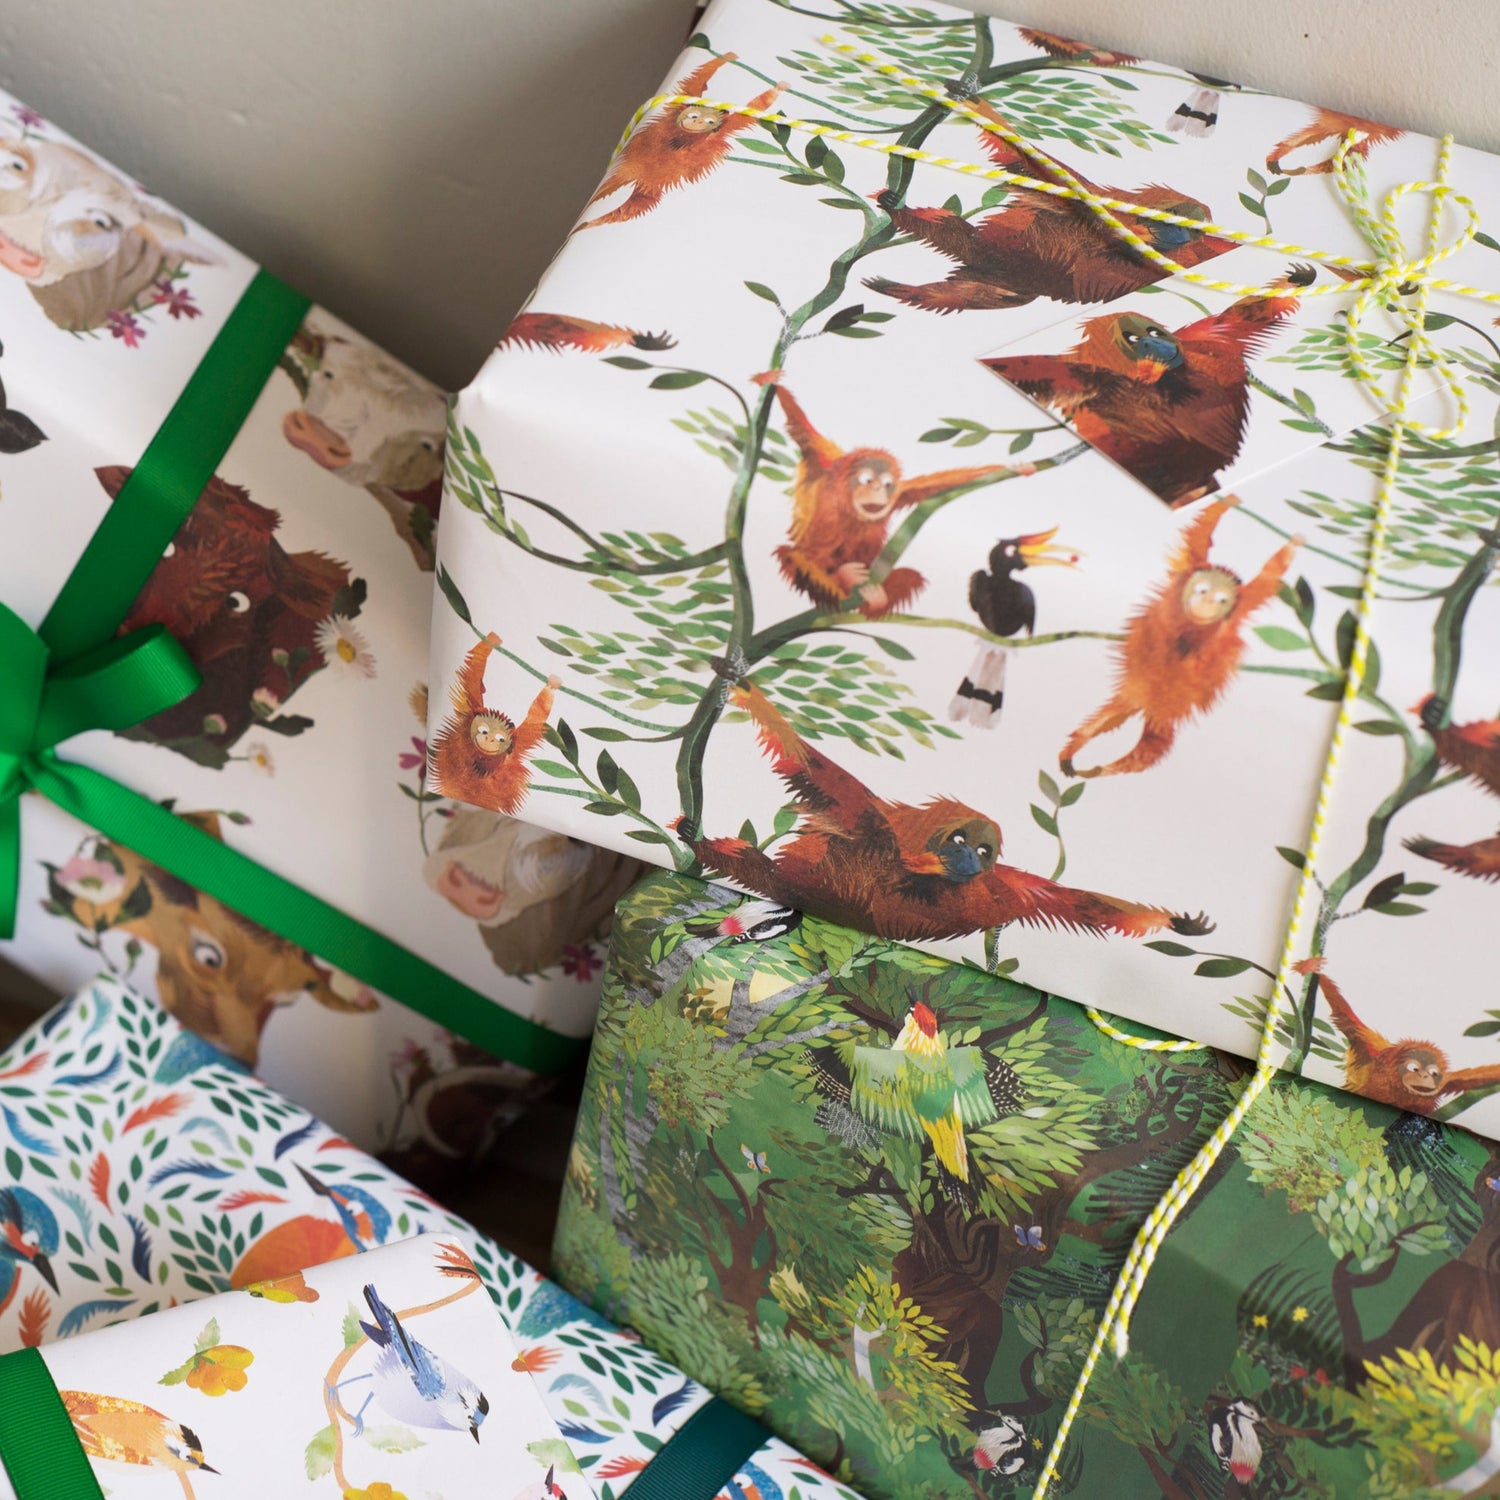 A selection of illustrated recycled wrapping paper